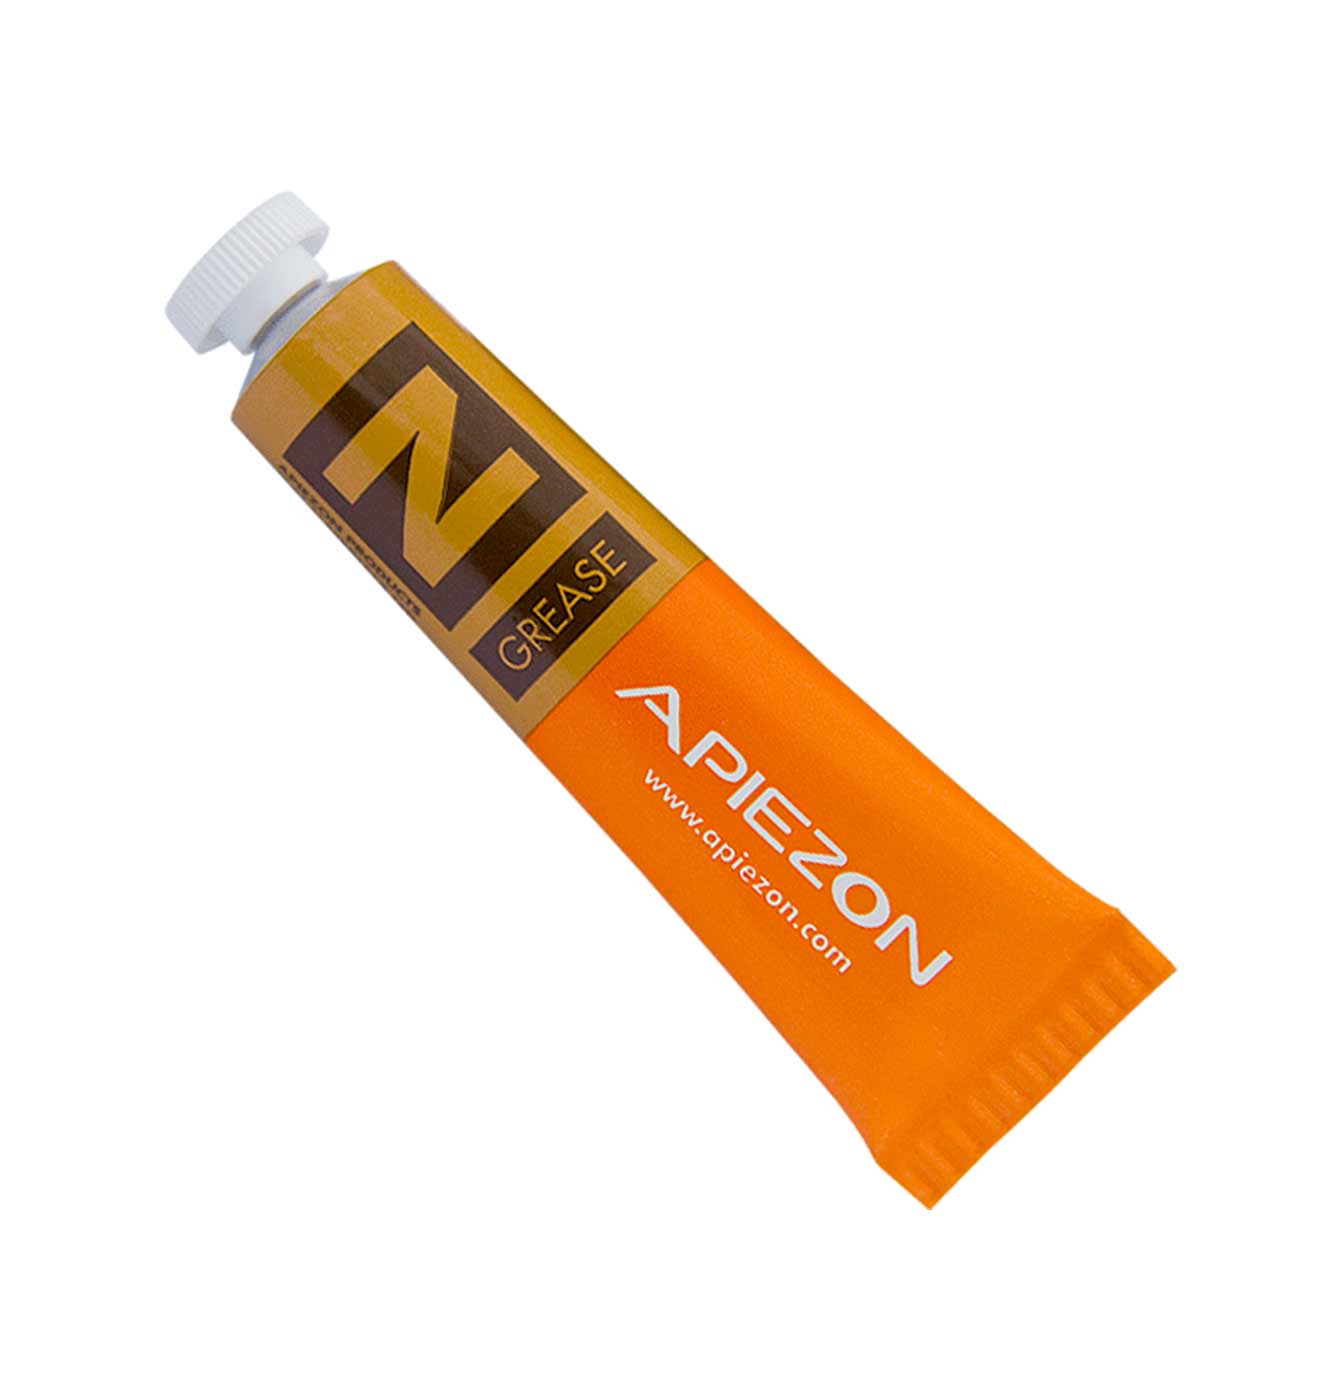 Apiezon 'N' 4K High Vacuum Grease 25g Tube (59-TGZ0001) product photo Front View L